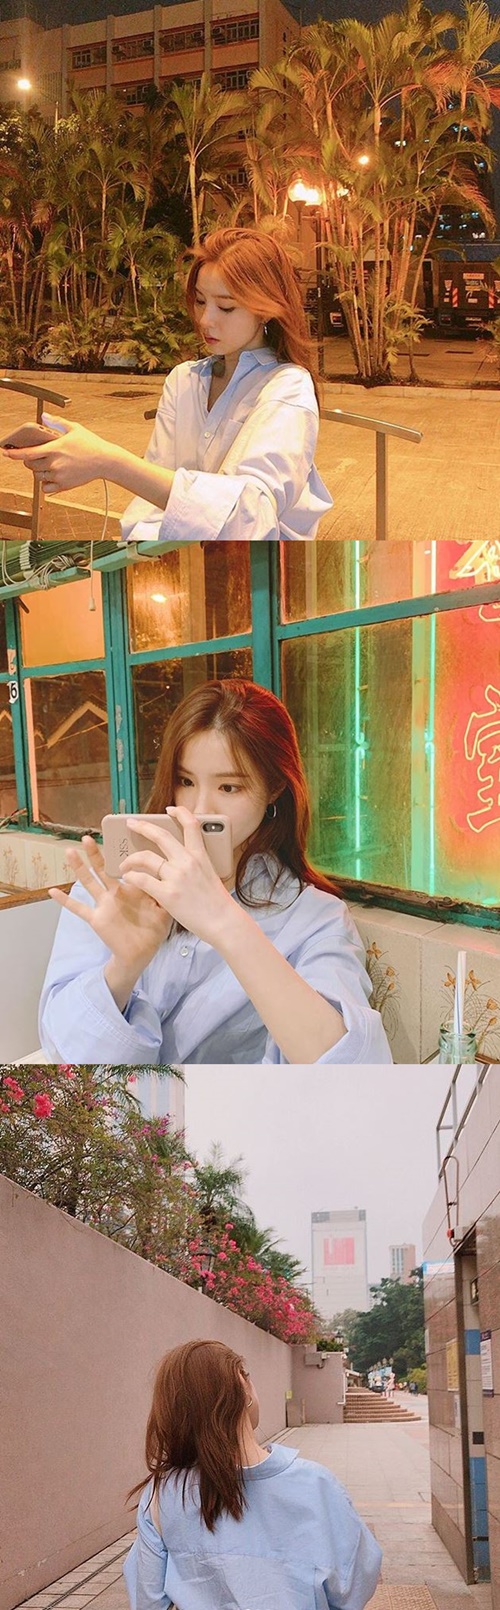 Actor Shin Se-kyung boasted a pure charm.Shin Se-kyung posted several photos on his instagram on the 3rd with the date 3.31.In the photo, Hong Kong stands at night and focuses on something. The unpretentious figure catches the eye.In another photo, Shin Se-kyung is immersed in a cell phone at a restaurant, with a distinct eye for pale makeup.Meanwhile, Shin Se-kyung left for the web reality shooting car Hong Kong last month.He will appear in MBCs new tree drama The New Entrepreneur, which is scheduled to be broadcast in July.